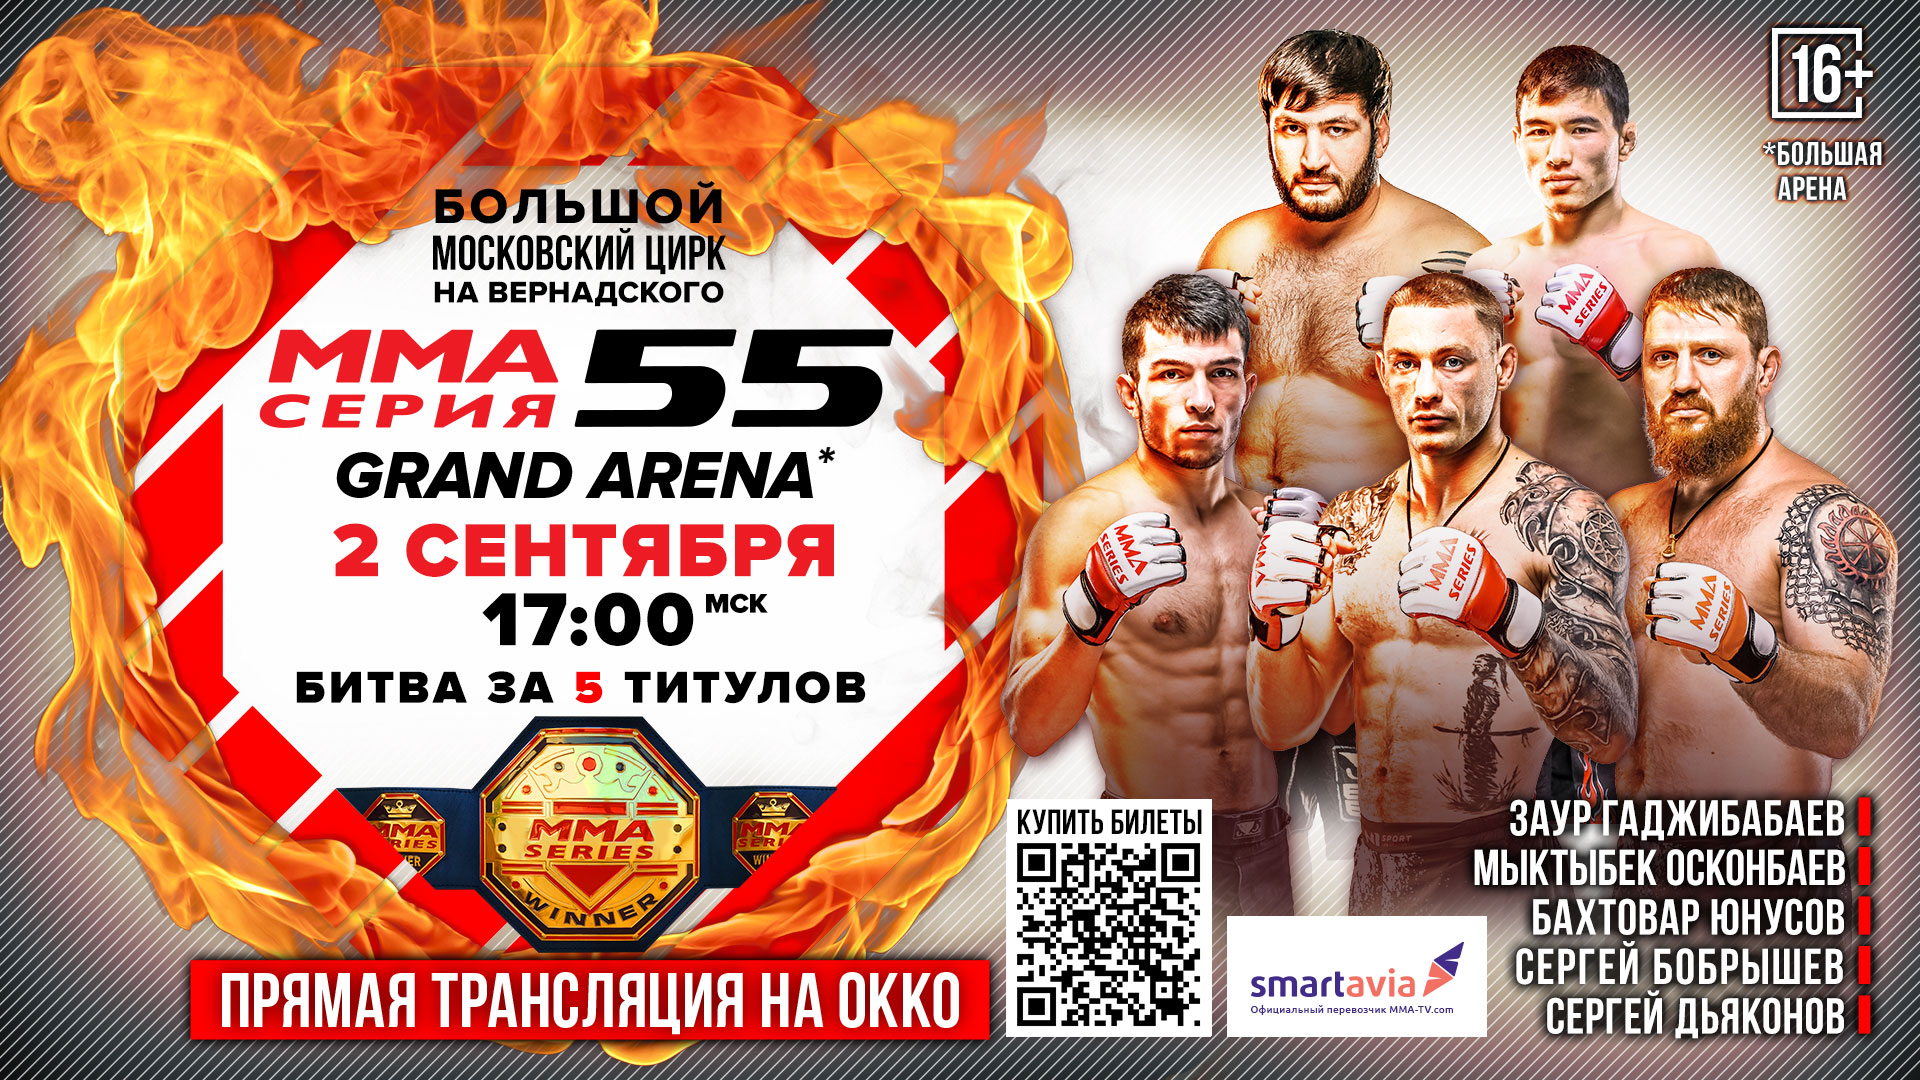 MMA Series — 55 Grand Arena MMA Series official website